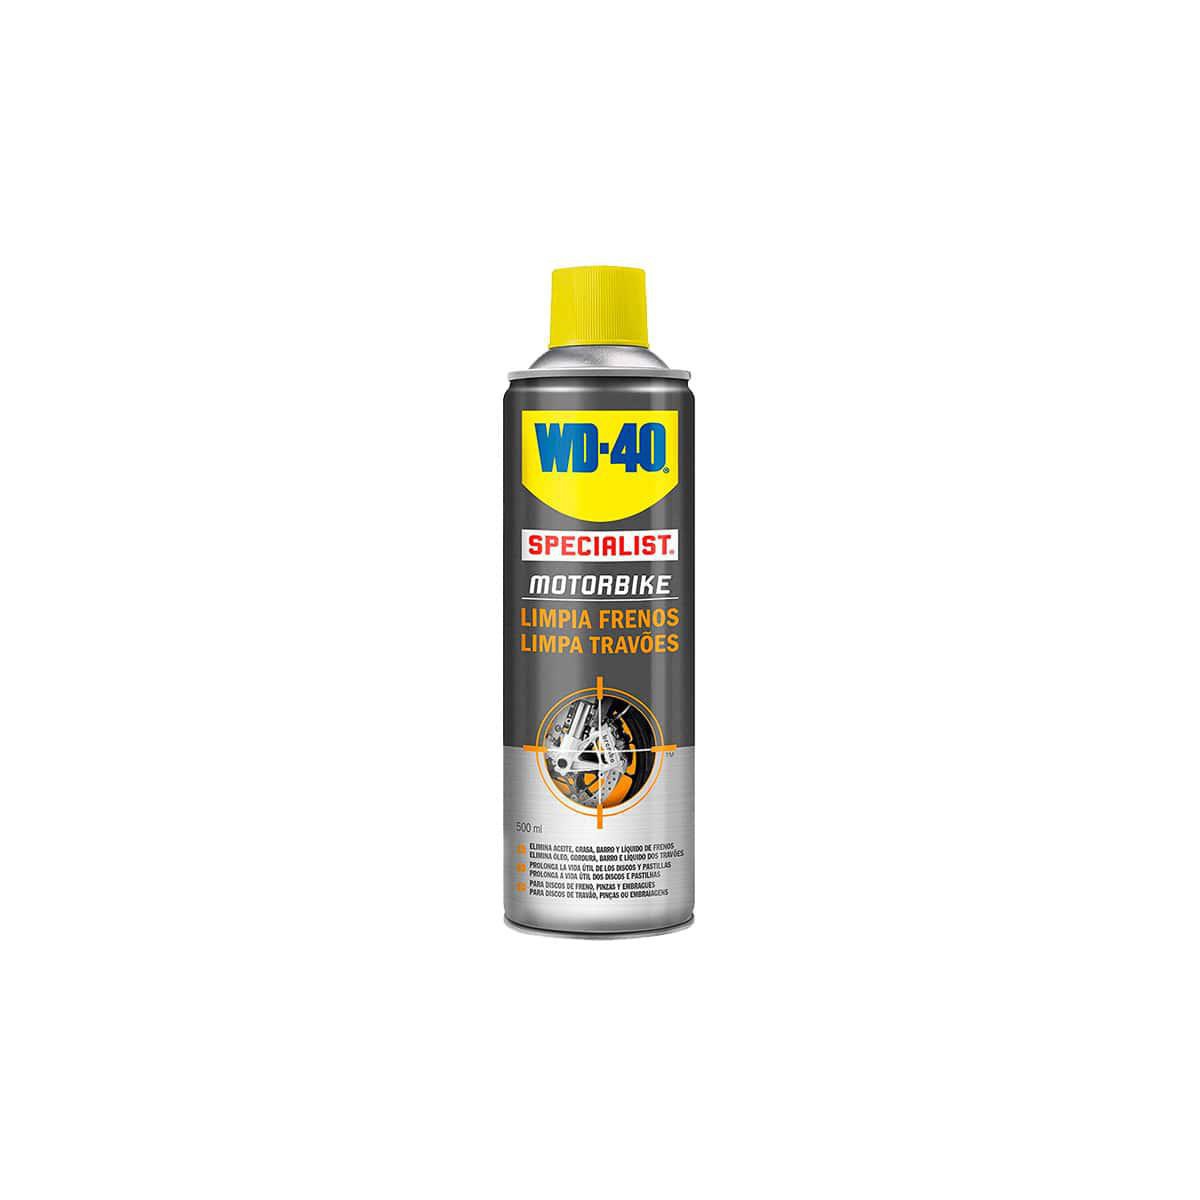 Wd40 - Nettoyant freins WD40 spray 400ml - Mastic, silicone, joint